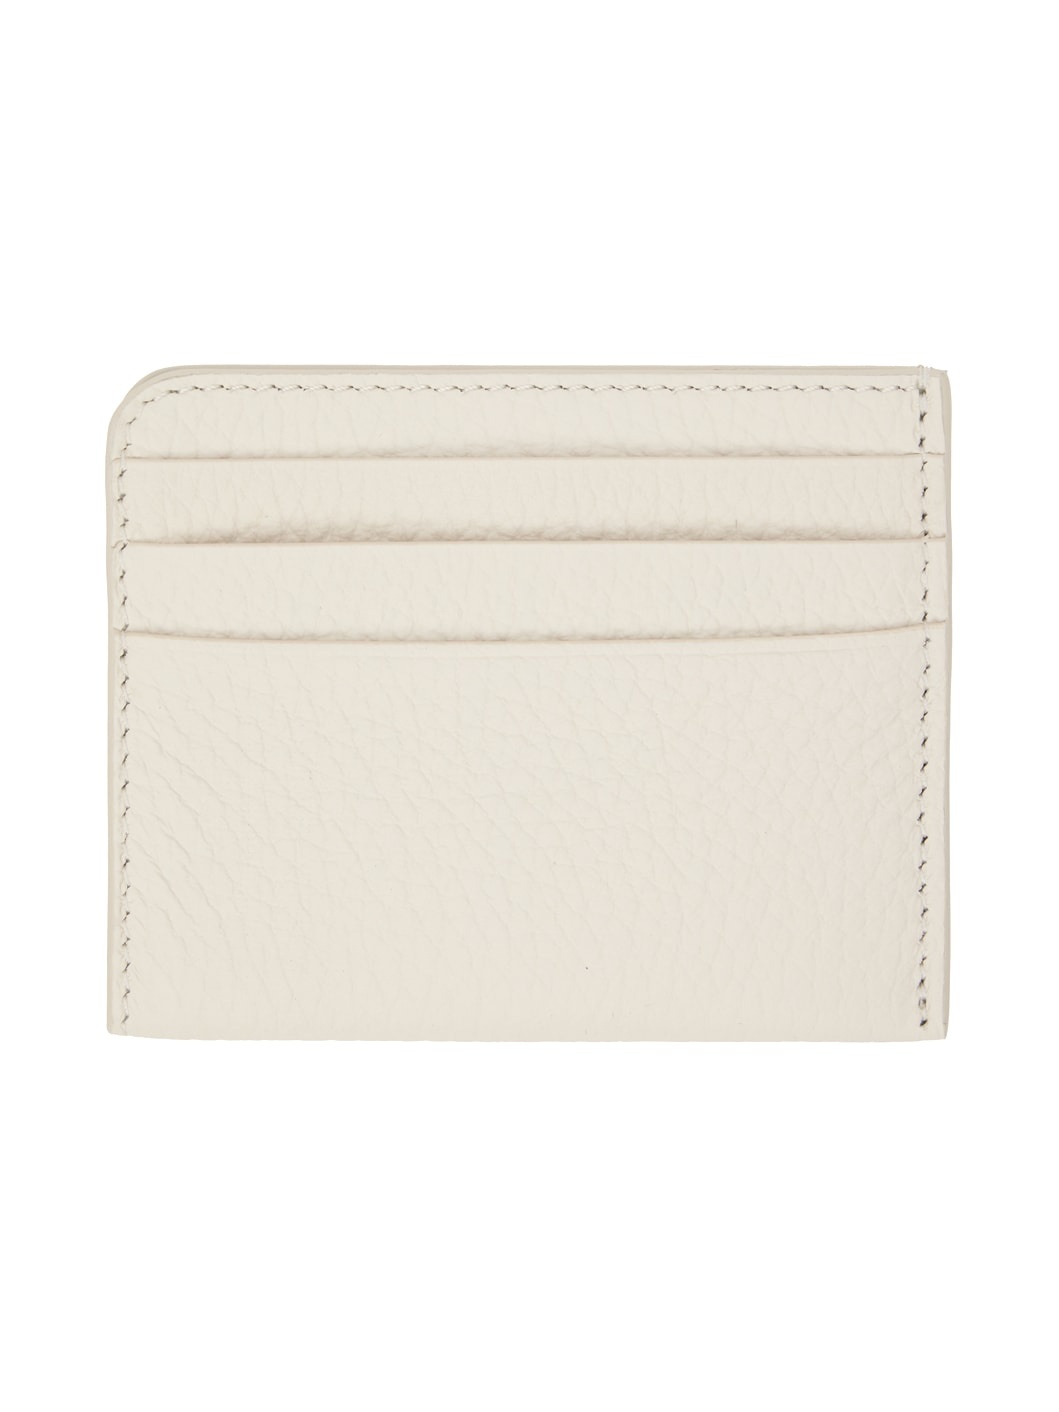 Off-White Grained Card Holder - 2